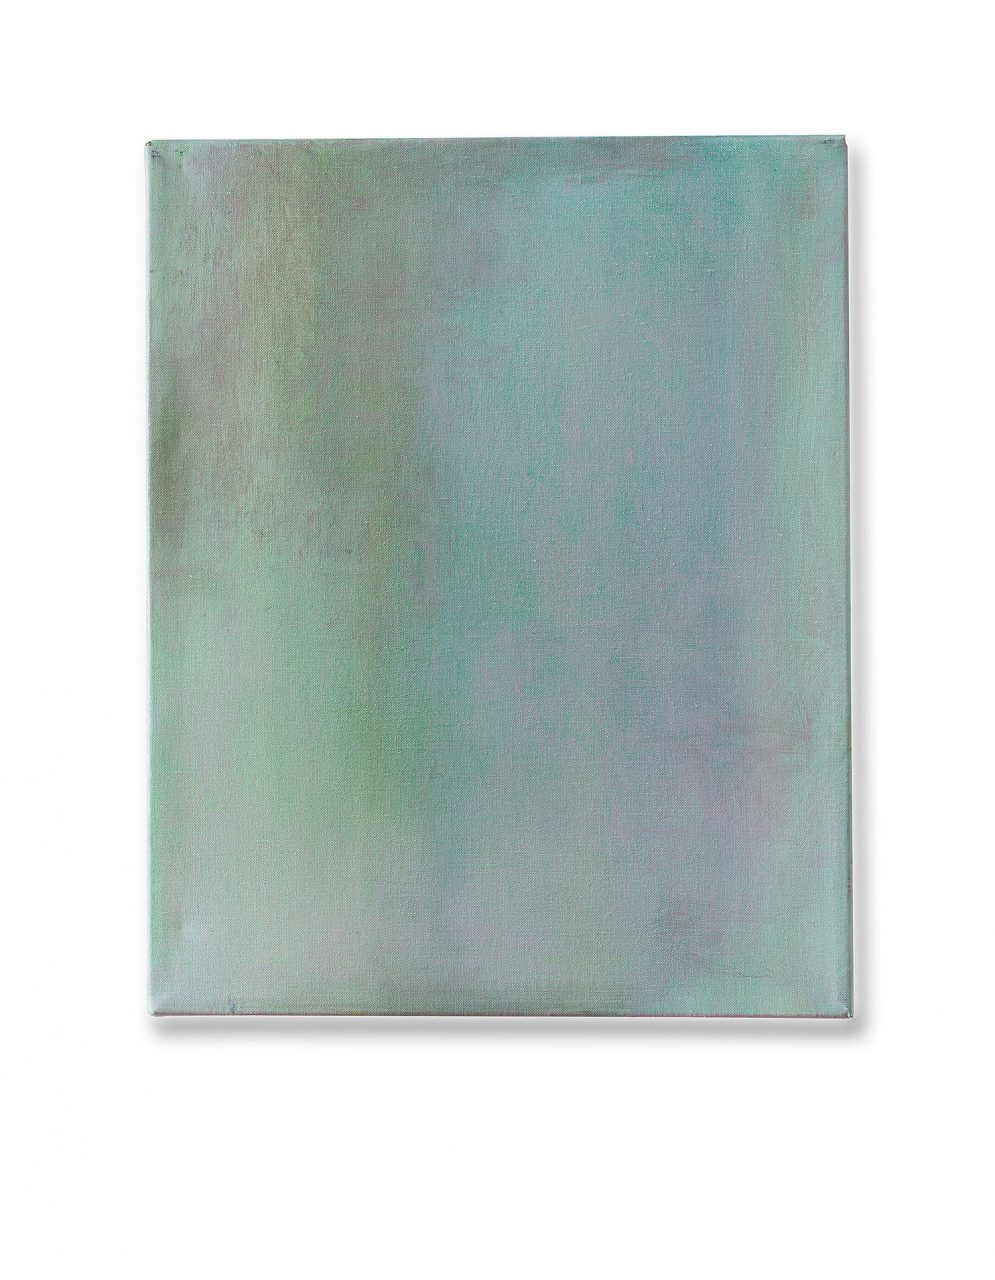 Untitled (climate state CI), 2013, Oil on canvas, 60 x 42 cm